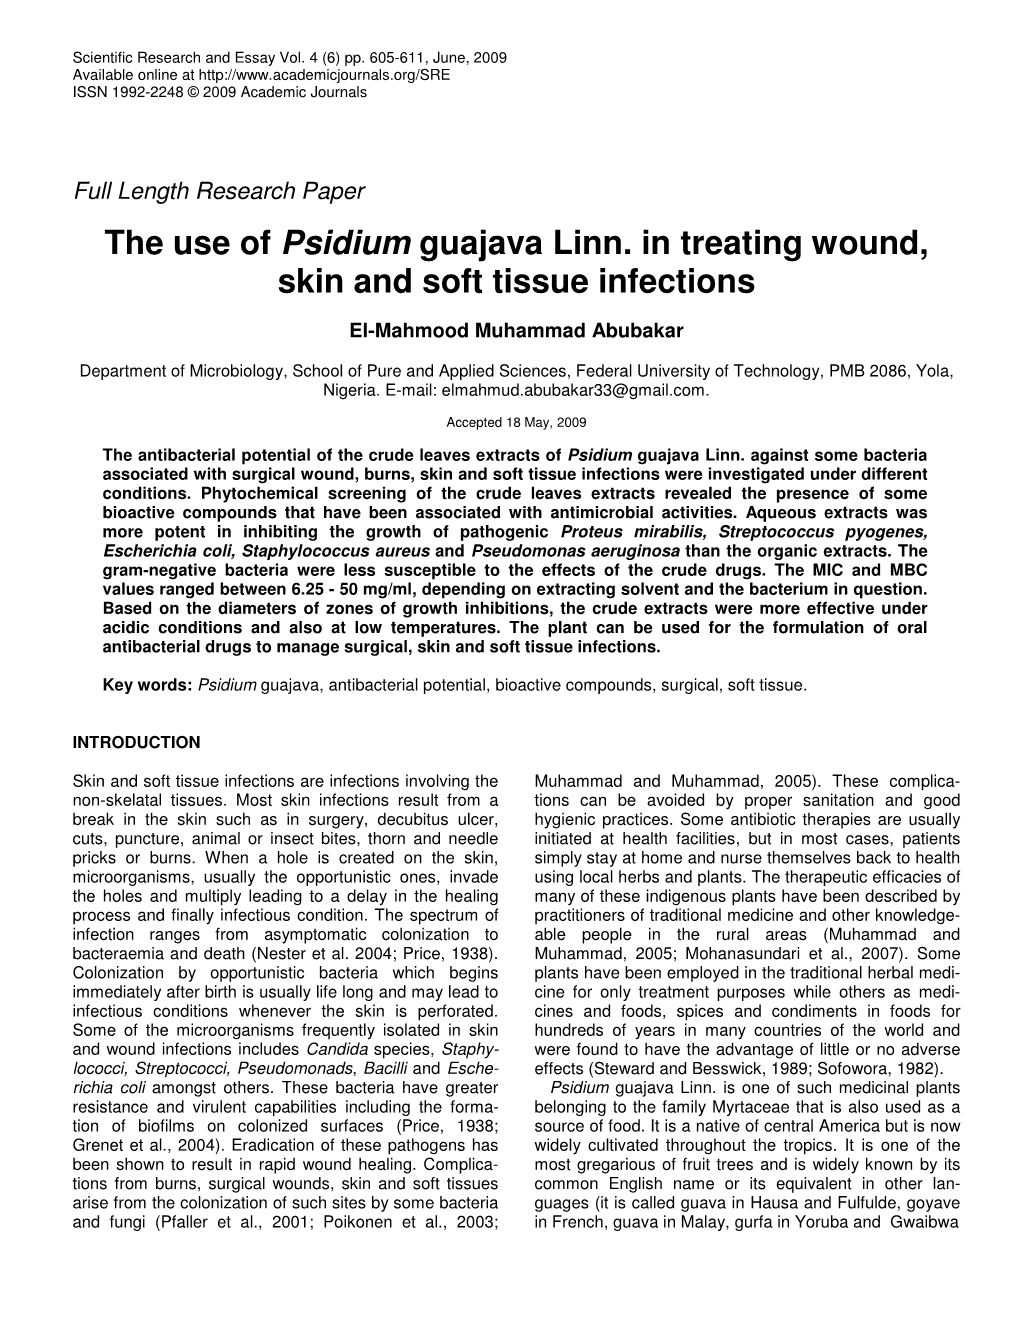 The Use of Psidium Guajava Linn. in Treating Wound, Skin and Soft Tissue Infections